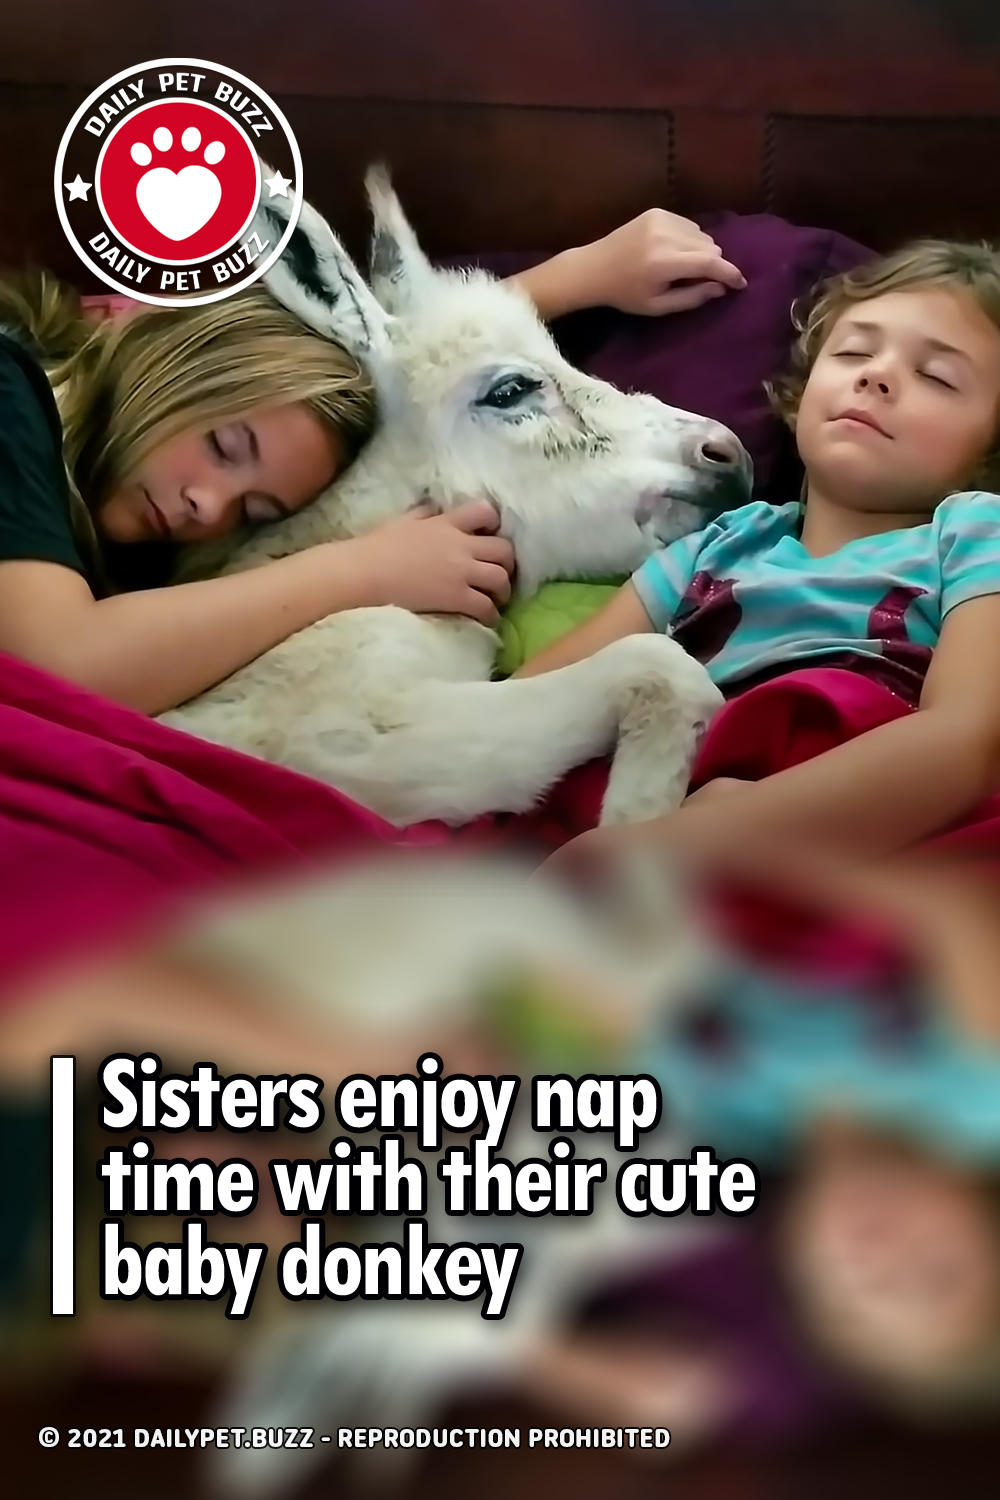 Sisters enjoy nap time with their cute baby donkey